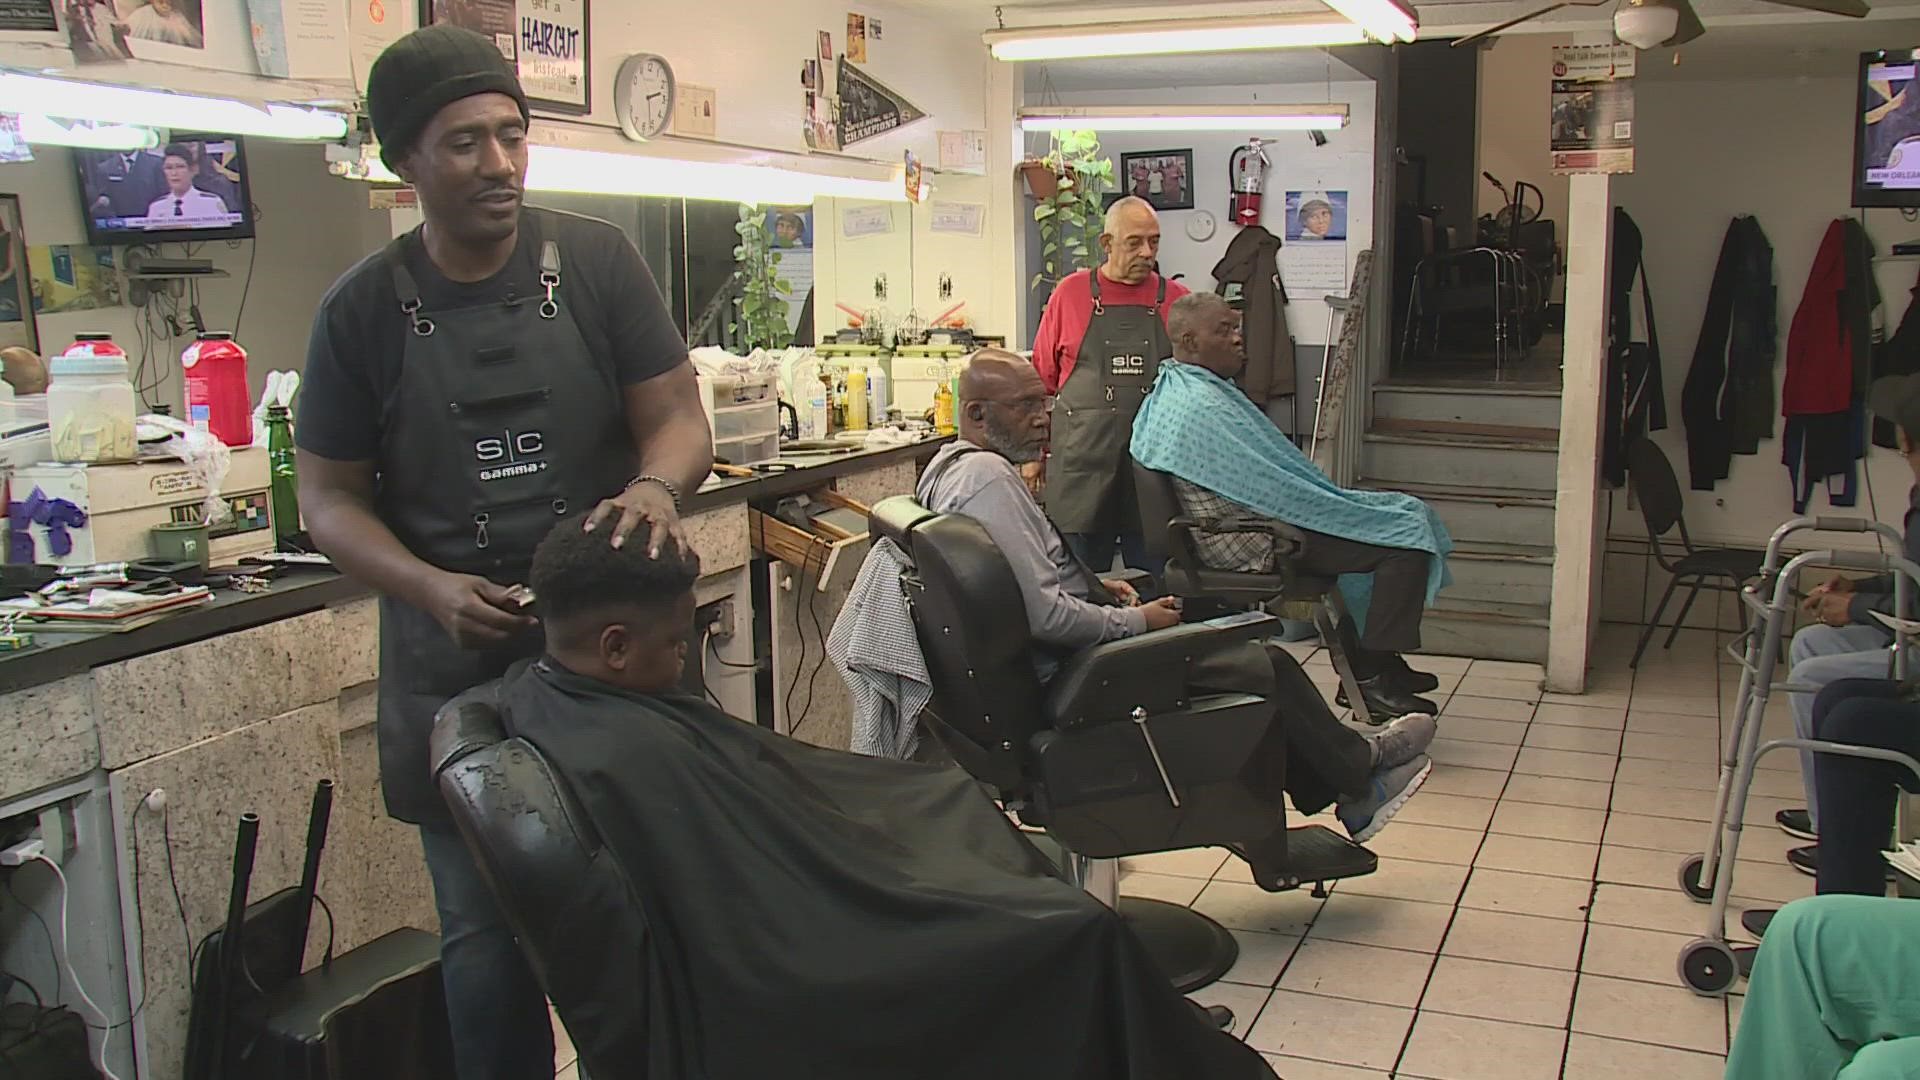 Stan Norwood is a barber at Dennis' Barber Shop on Freret. He works to mentor his young clients by offering advice and life lessons.